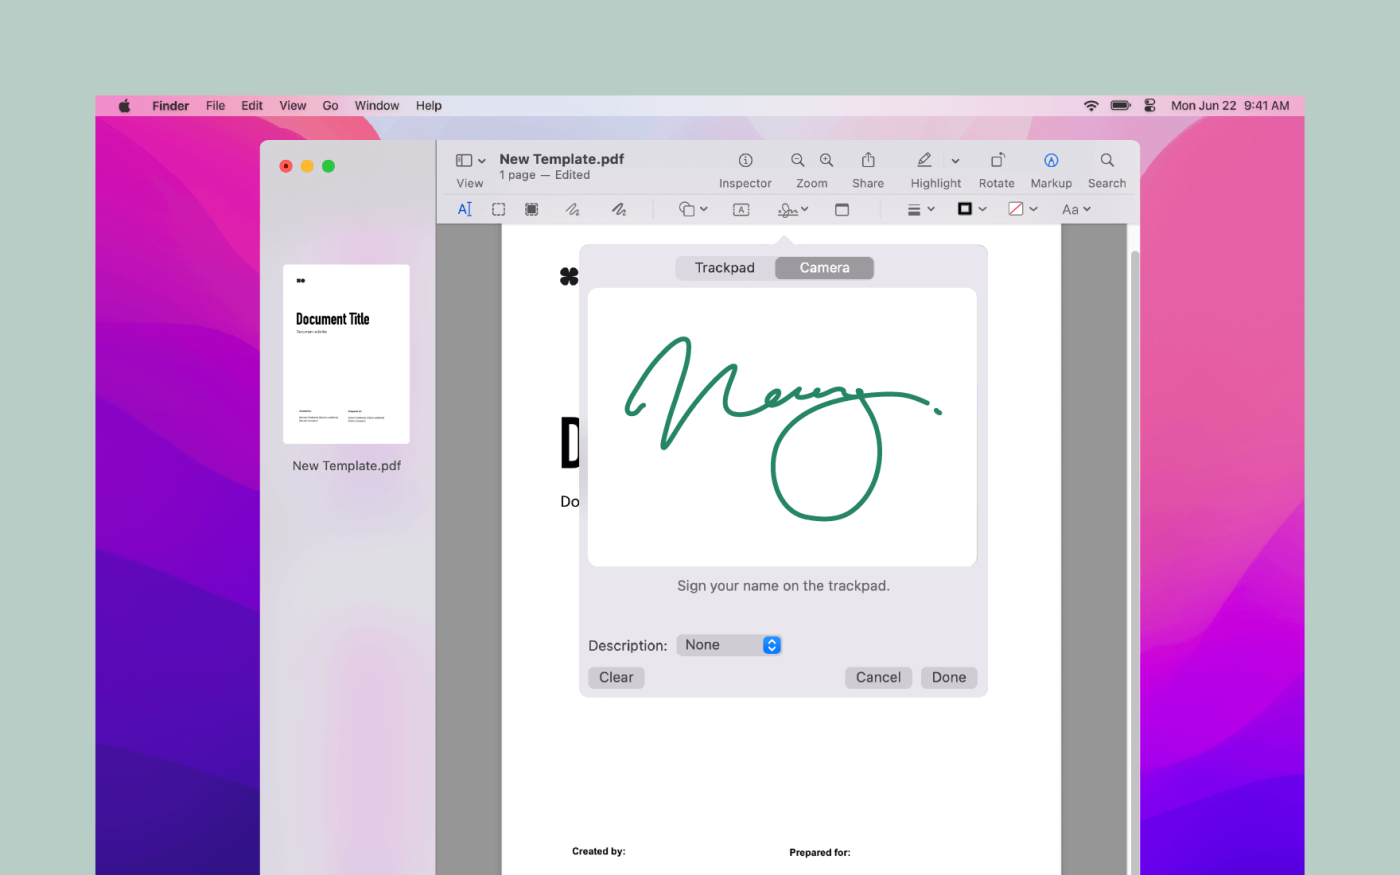 Use your Mac’s camera by handwriting a signature on a blank piece of paper and holding it up to the camera